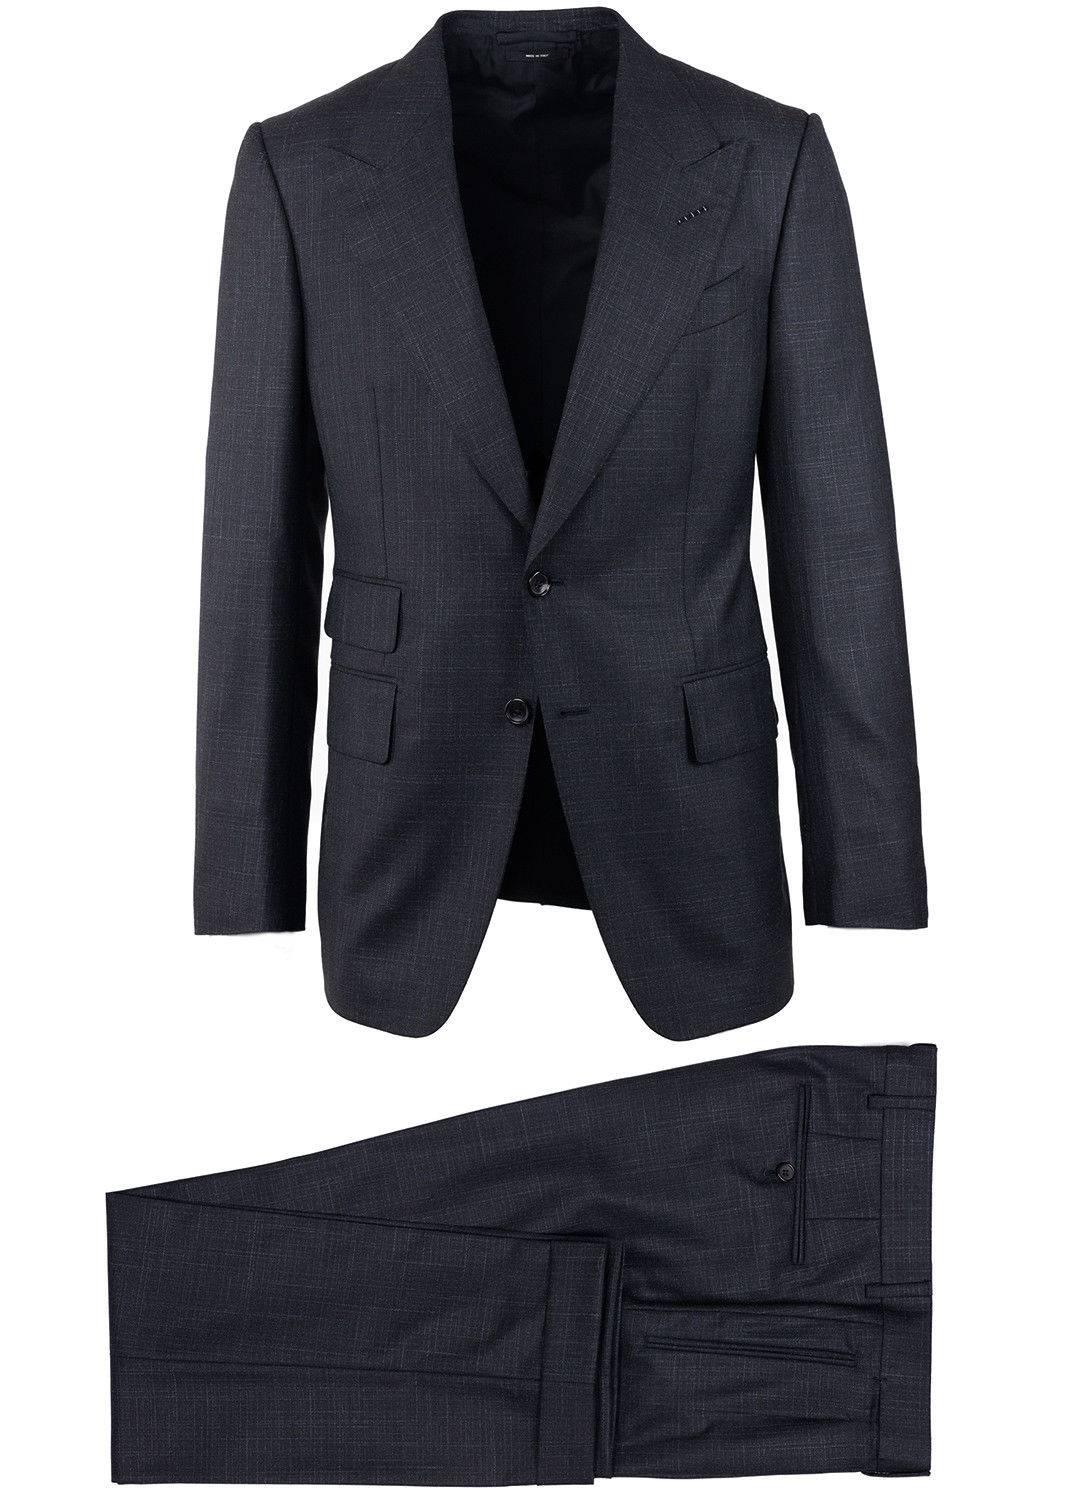 Tom Ford Black Wool Blend Shelton Two Button 2PC Suit For Sale 3